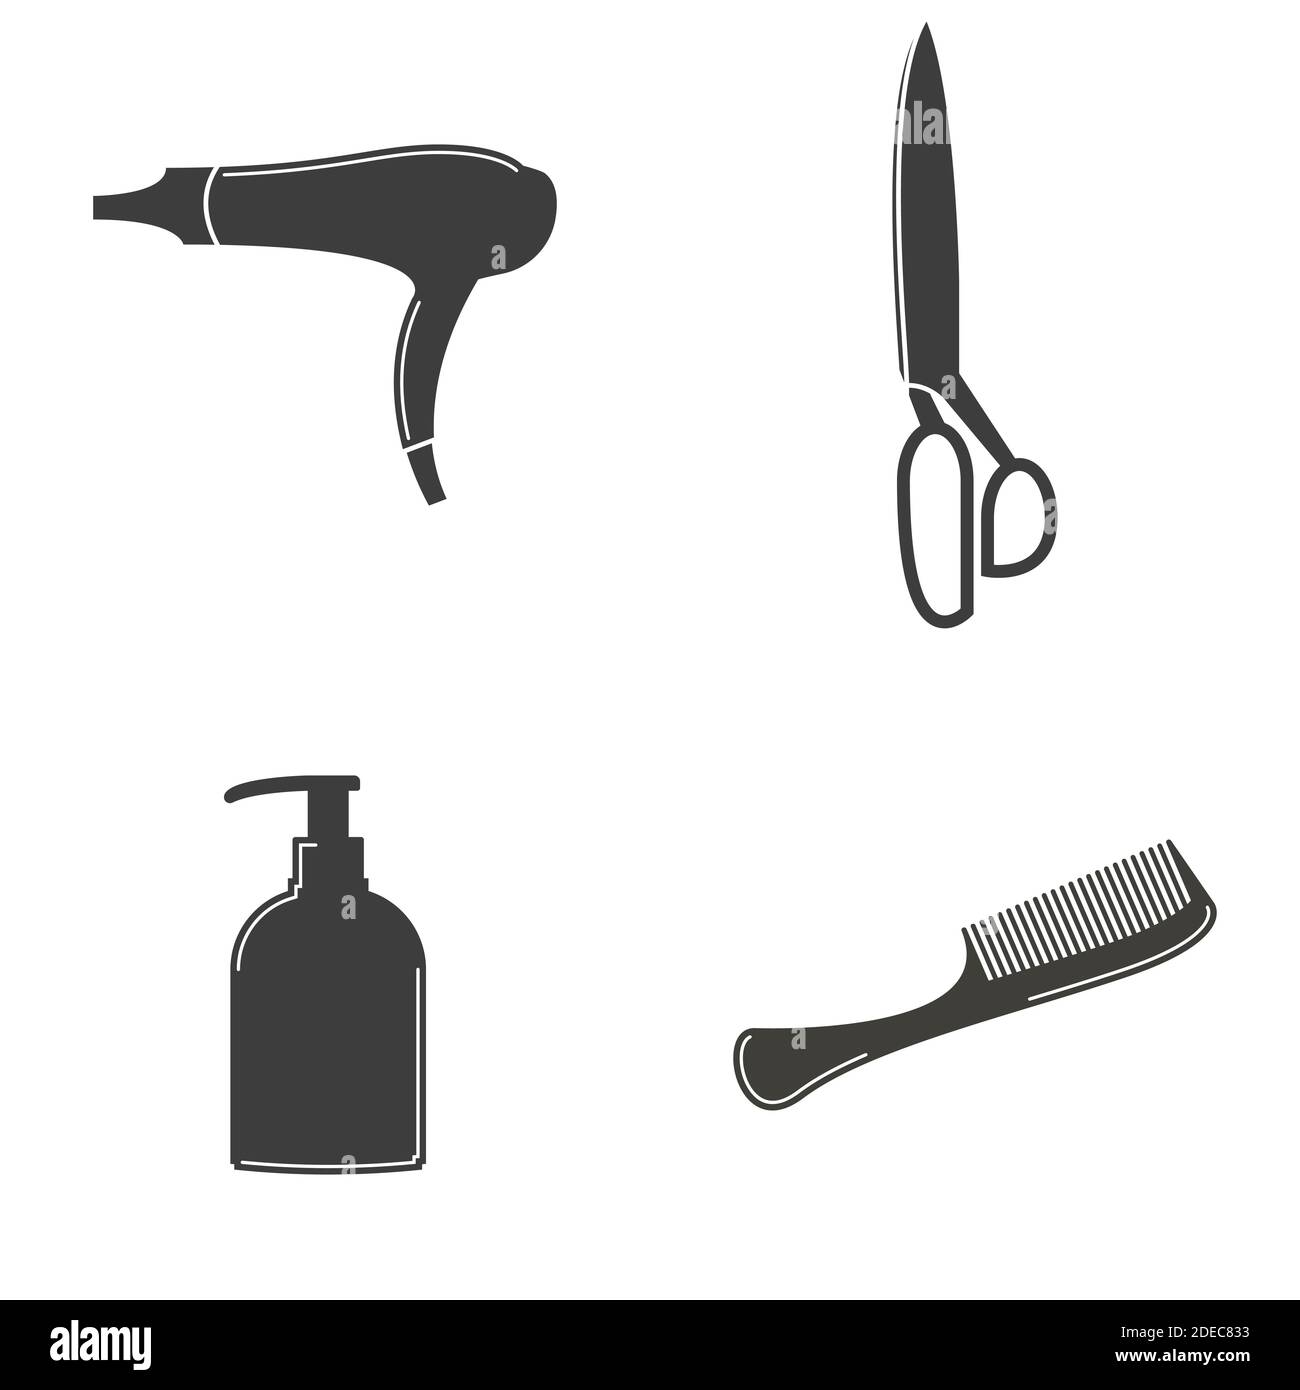 Set of objects on the theme of hair care Stock Vector